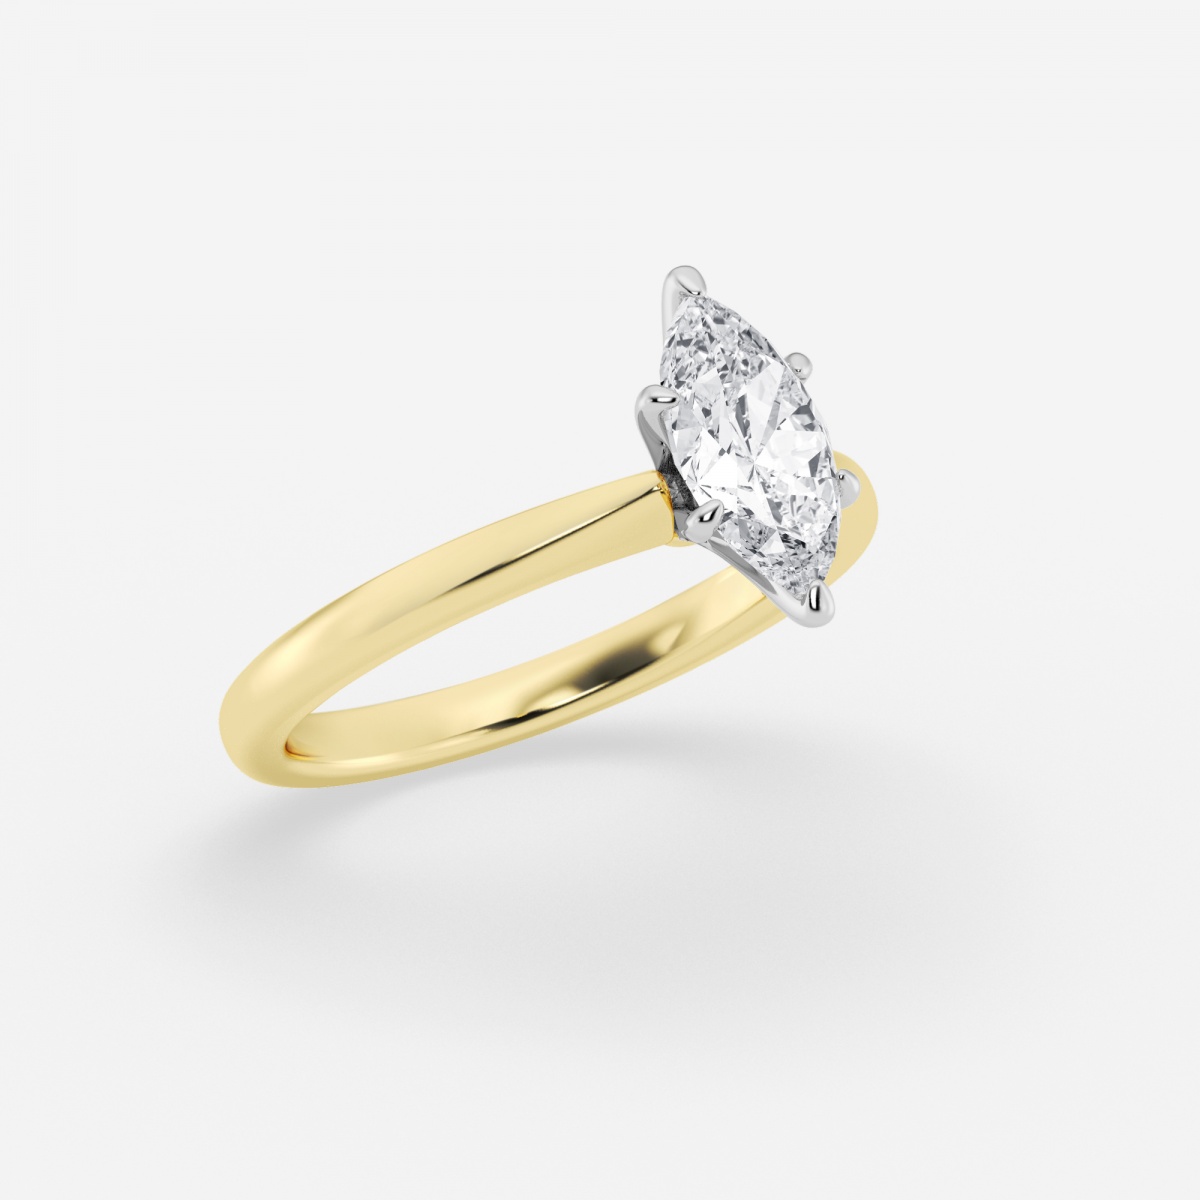 Additional Image 1 for  1 ctw Marquise Lab Grown Diamond Petite Solitaire Engagement Ring